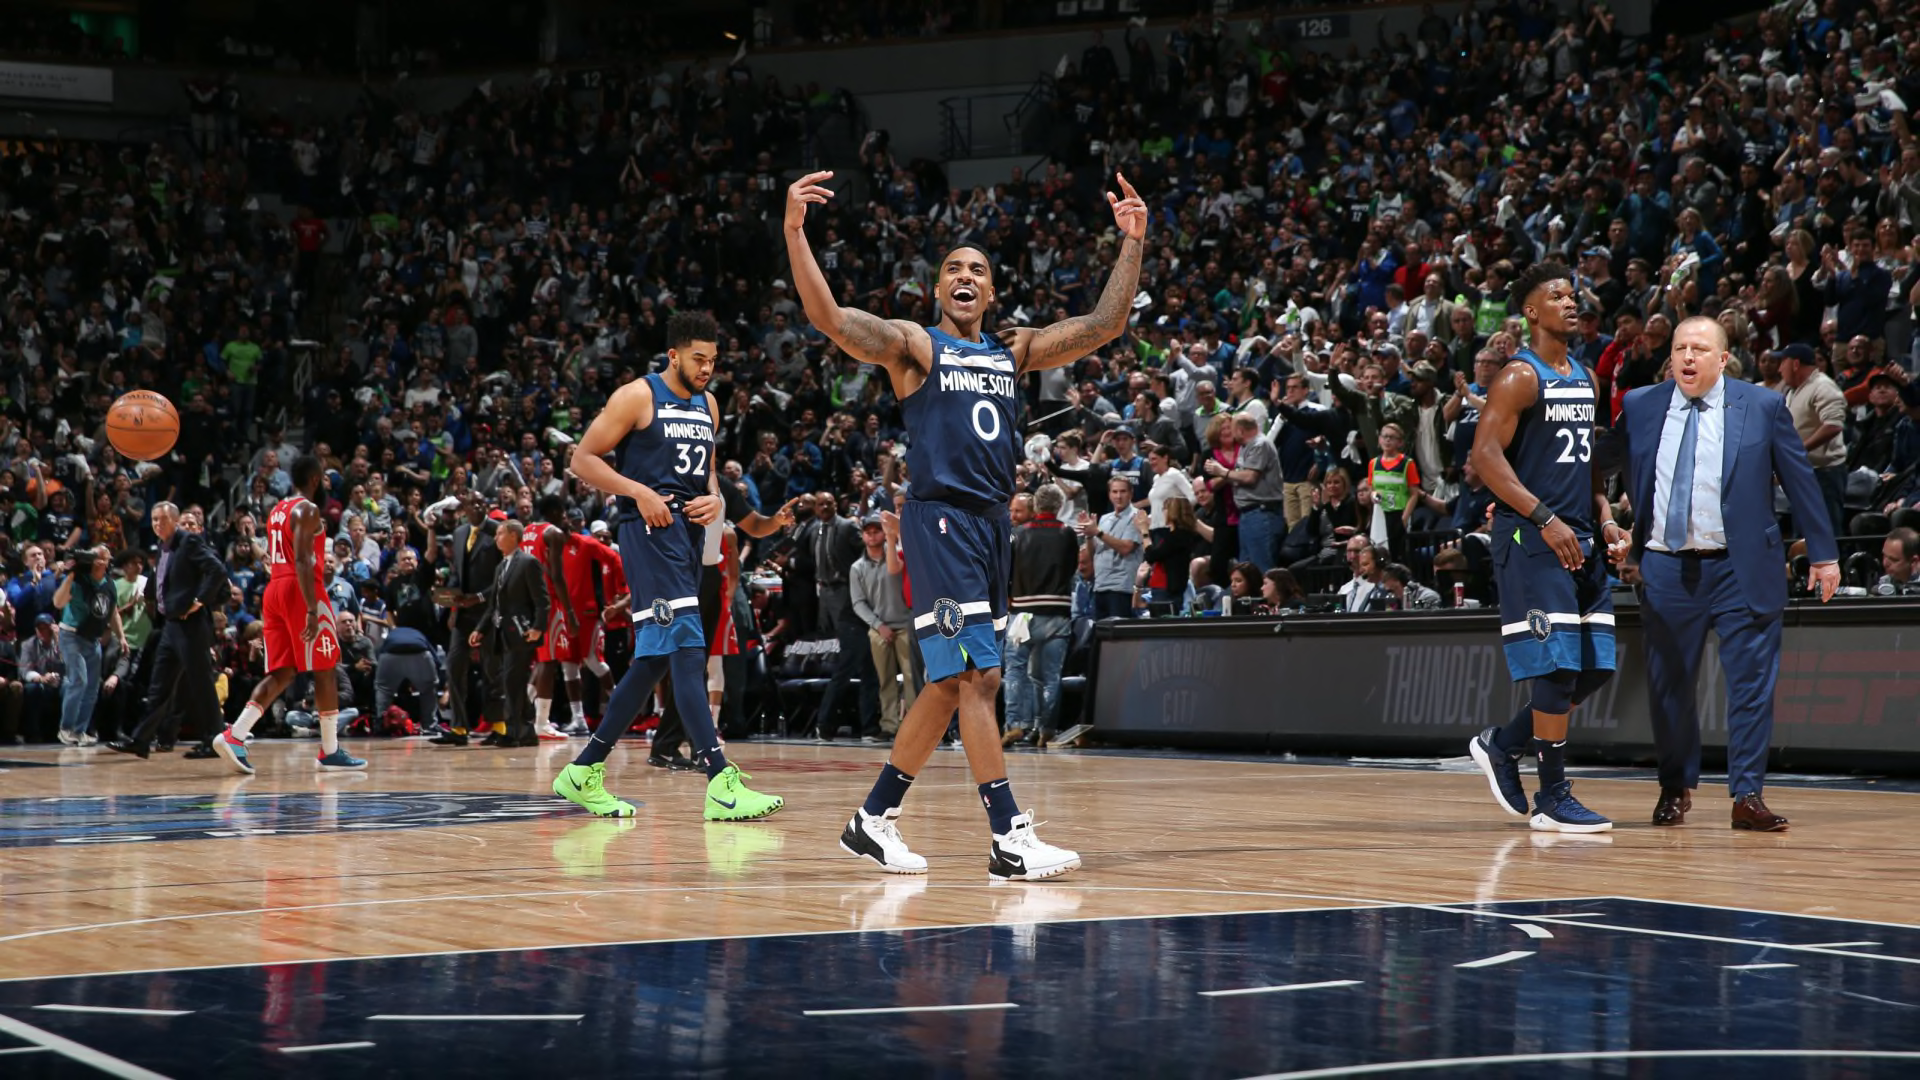 Top 5 Minnesota Timberwolves games from the 201718 season